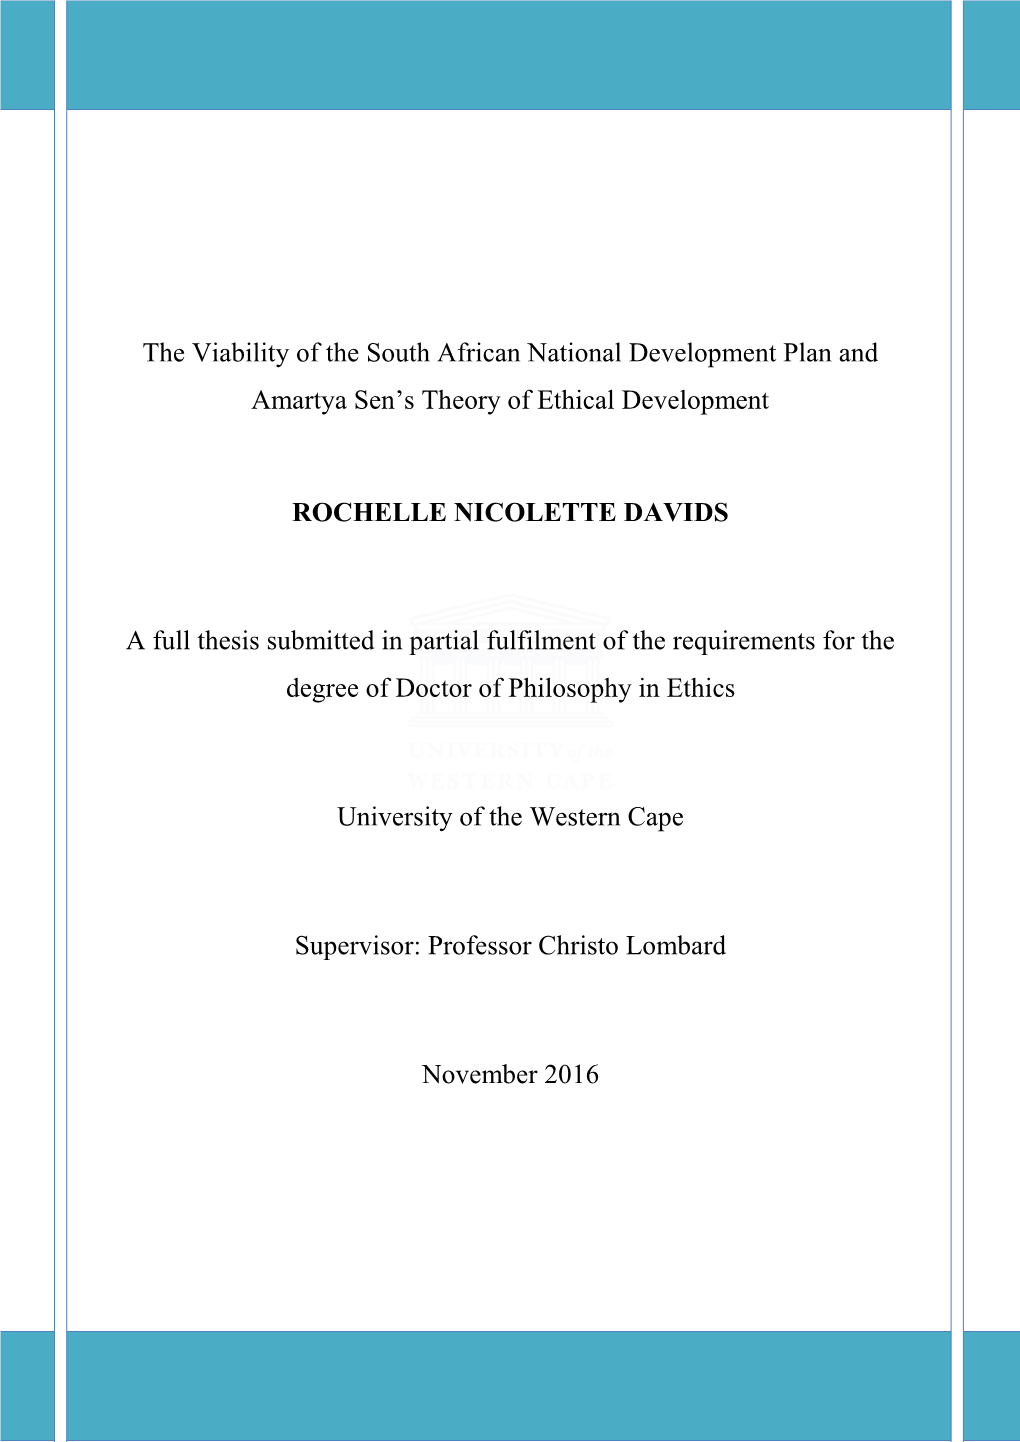 The Viability of the South African National Plan and Amartya Sen's